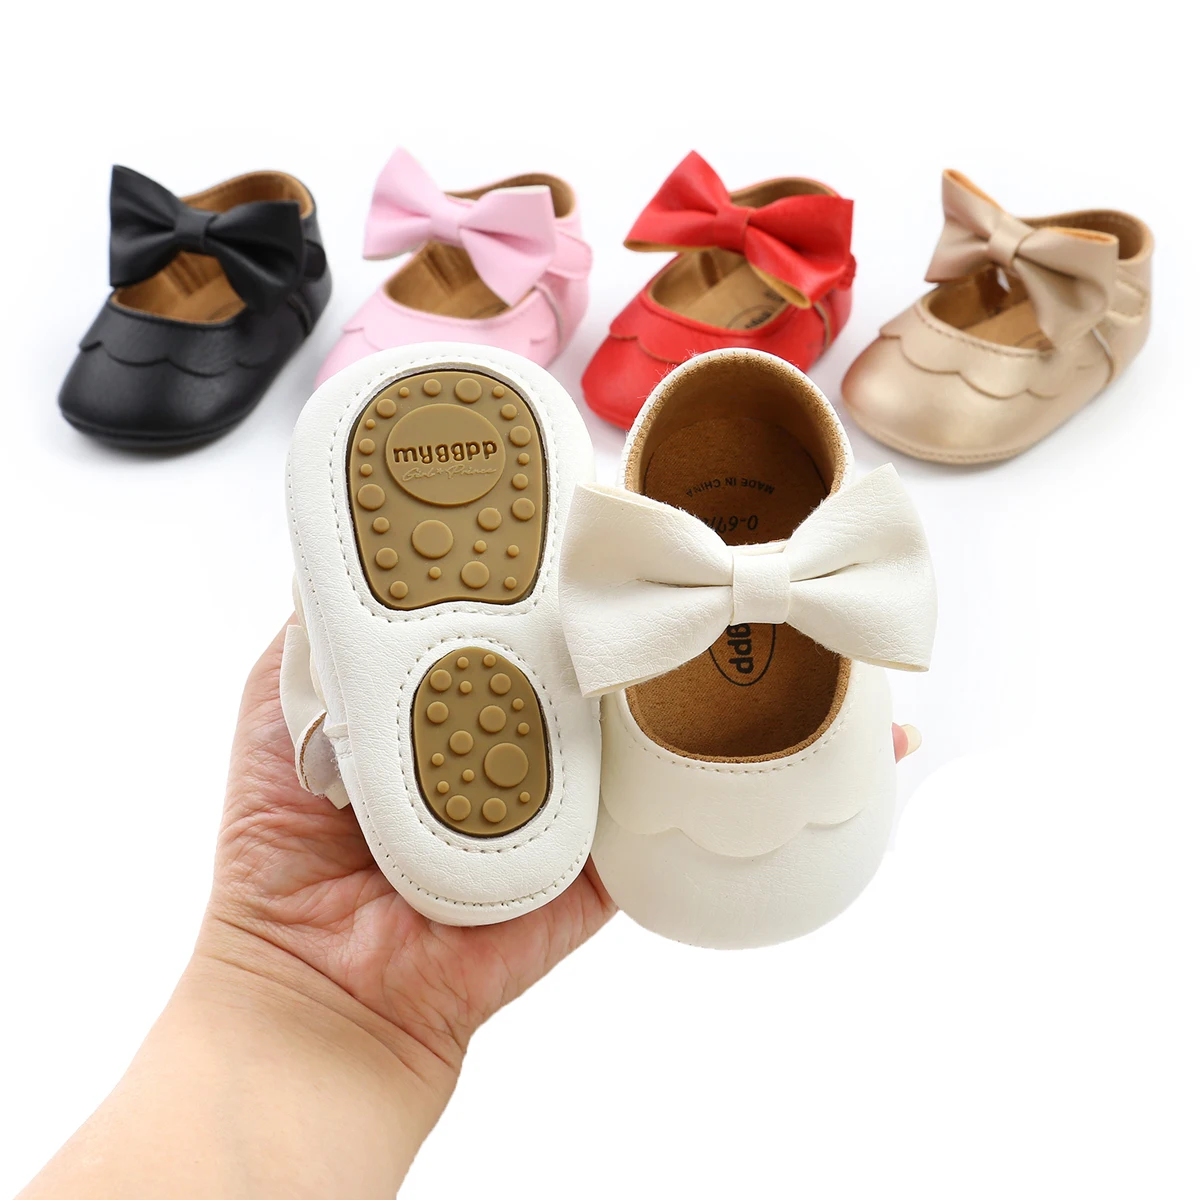 0-18M Baby Infant Girls Flat Shoes Bow Knot Solid First Walker Soft Sole Shoes Newborn Infant Toddler Girls Princess Shoes 0 18m baby infant girls flat shoes bow knot solid first walker soft sole shoes newborn infant toddler girls princess shoes